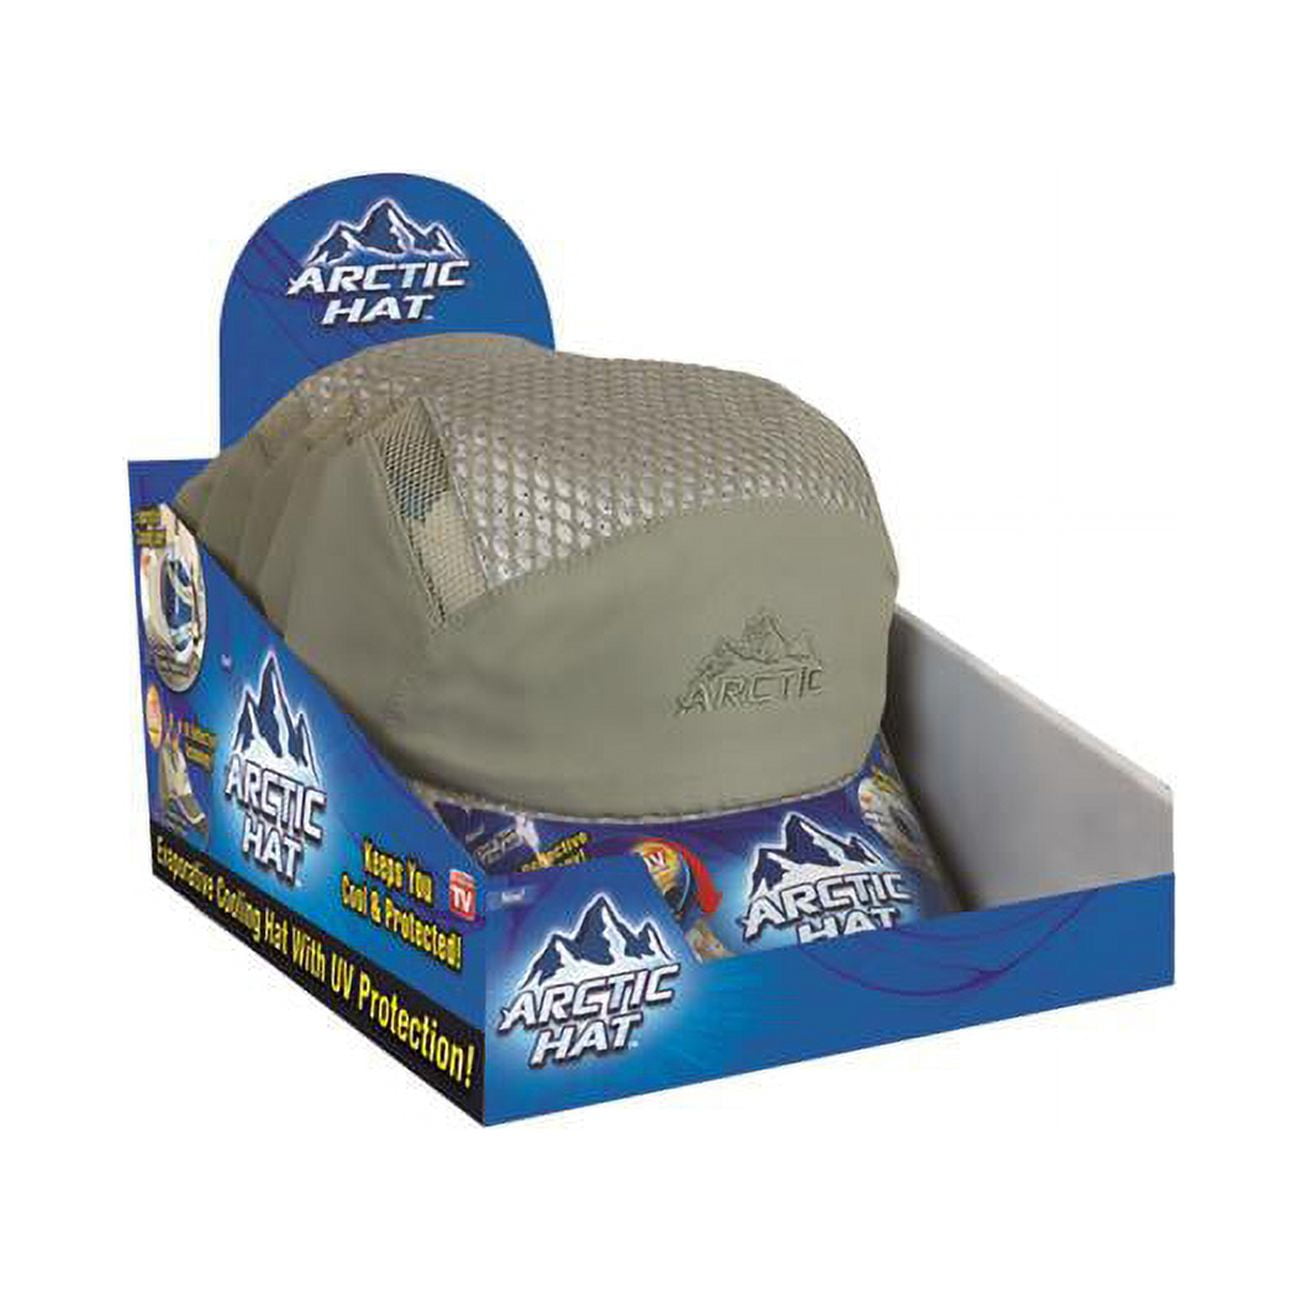 Arctic Hat Evaporative Polyester/Polyethylene Cooling Cap, 1 ct - Jay C  Food Stores